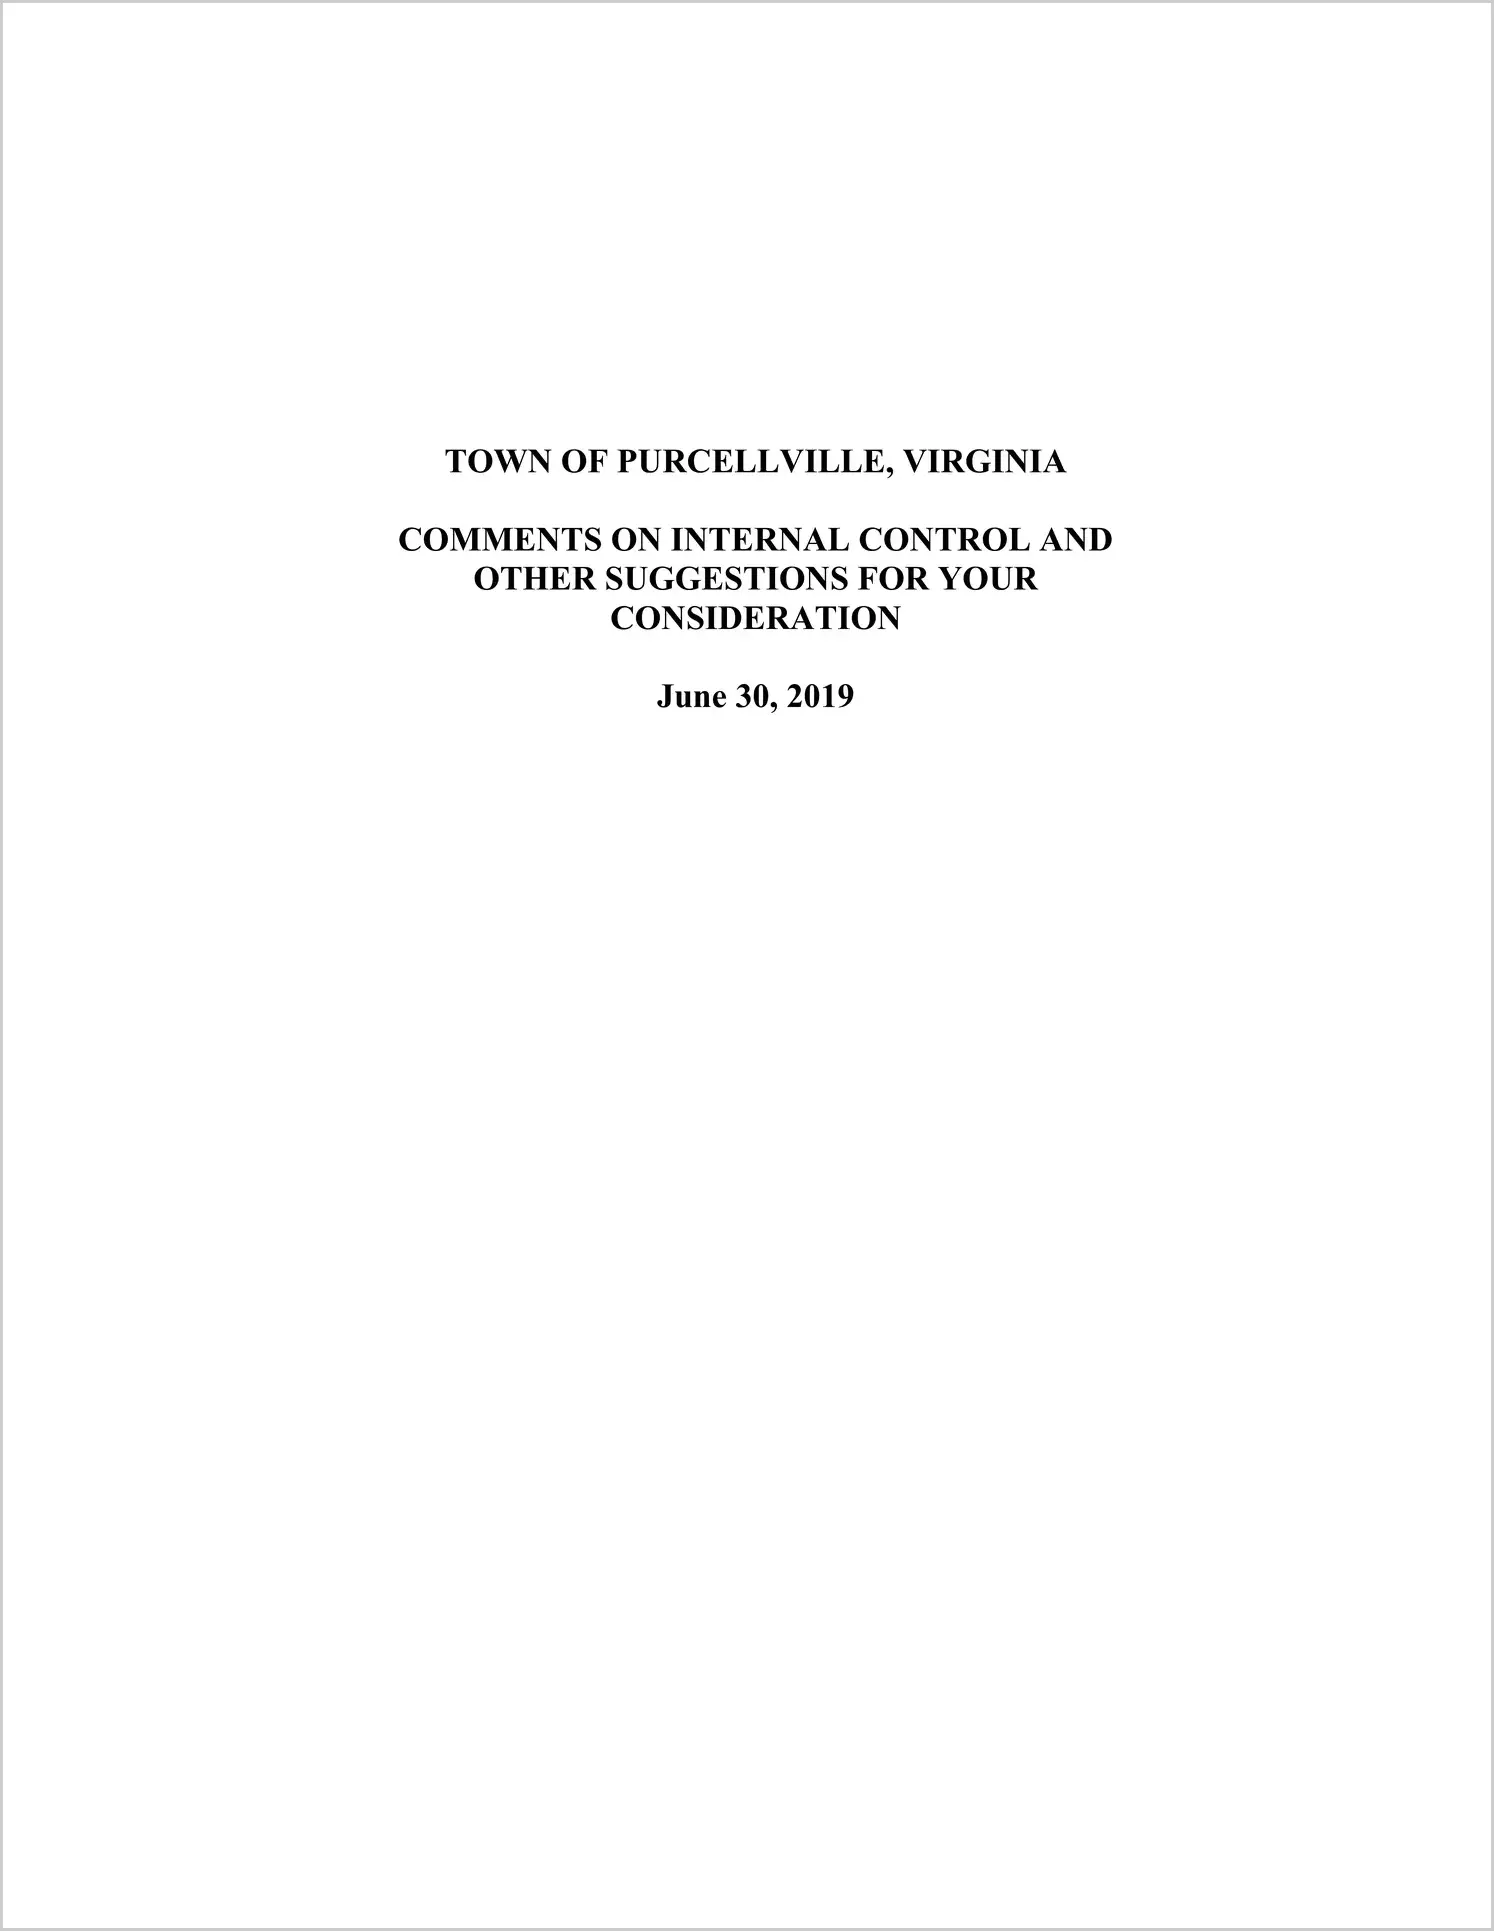 2019 Management Letter for Town of Purcellville